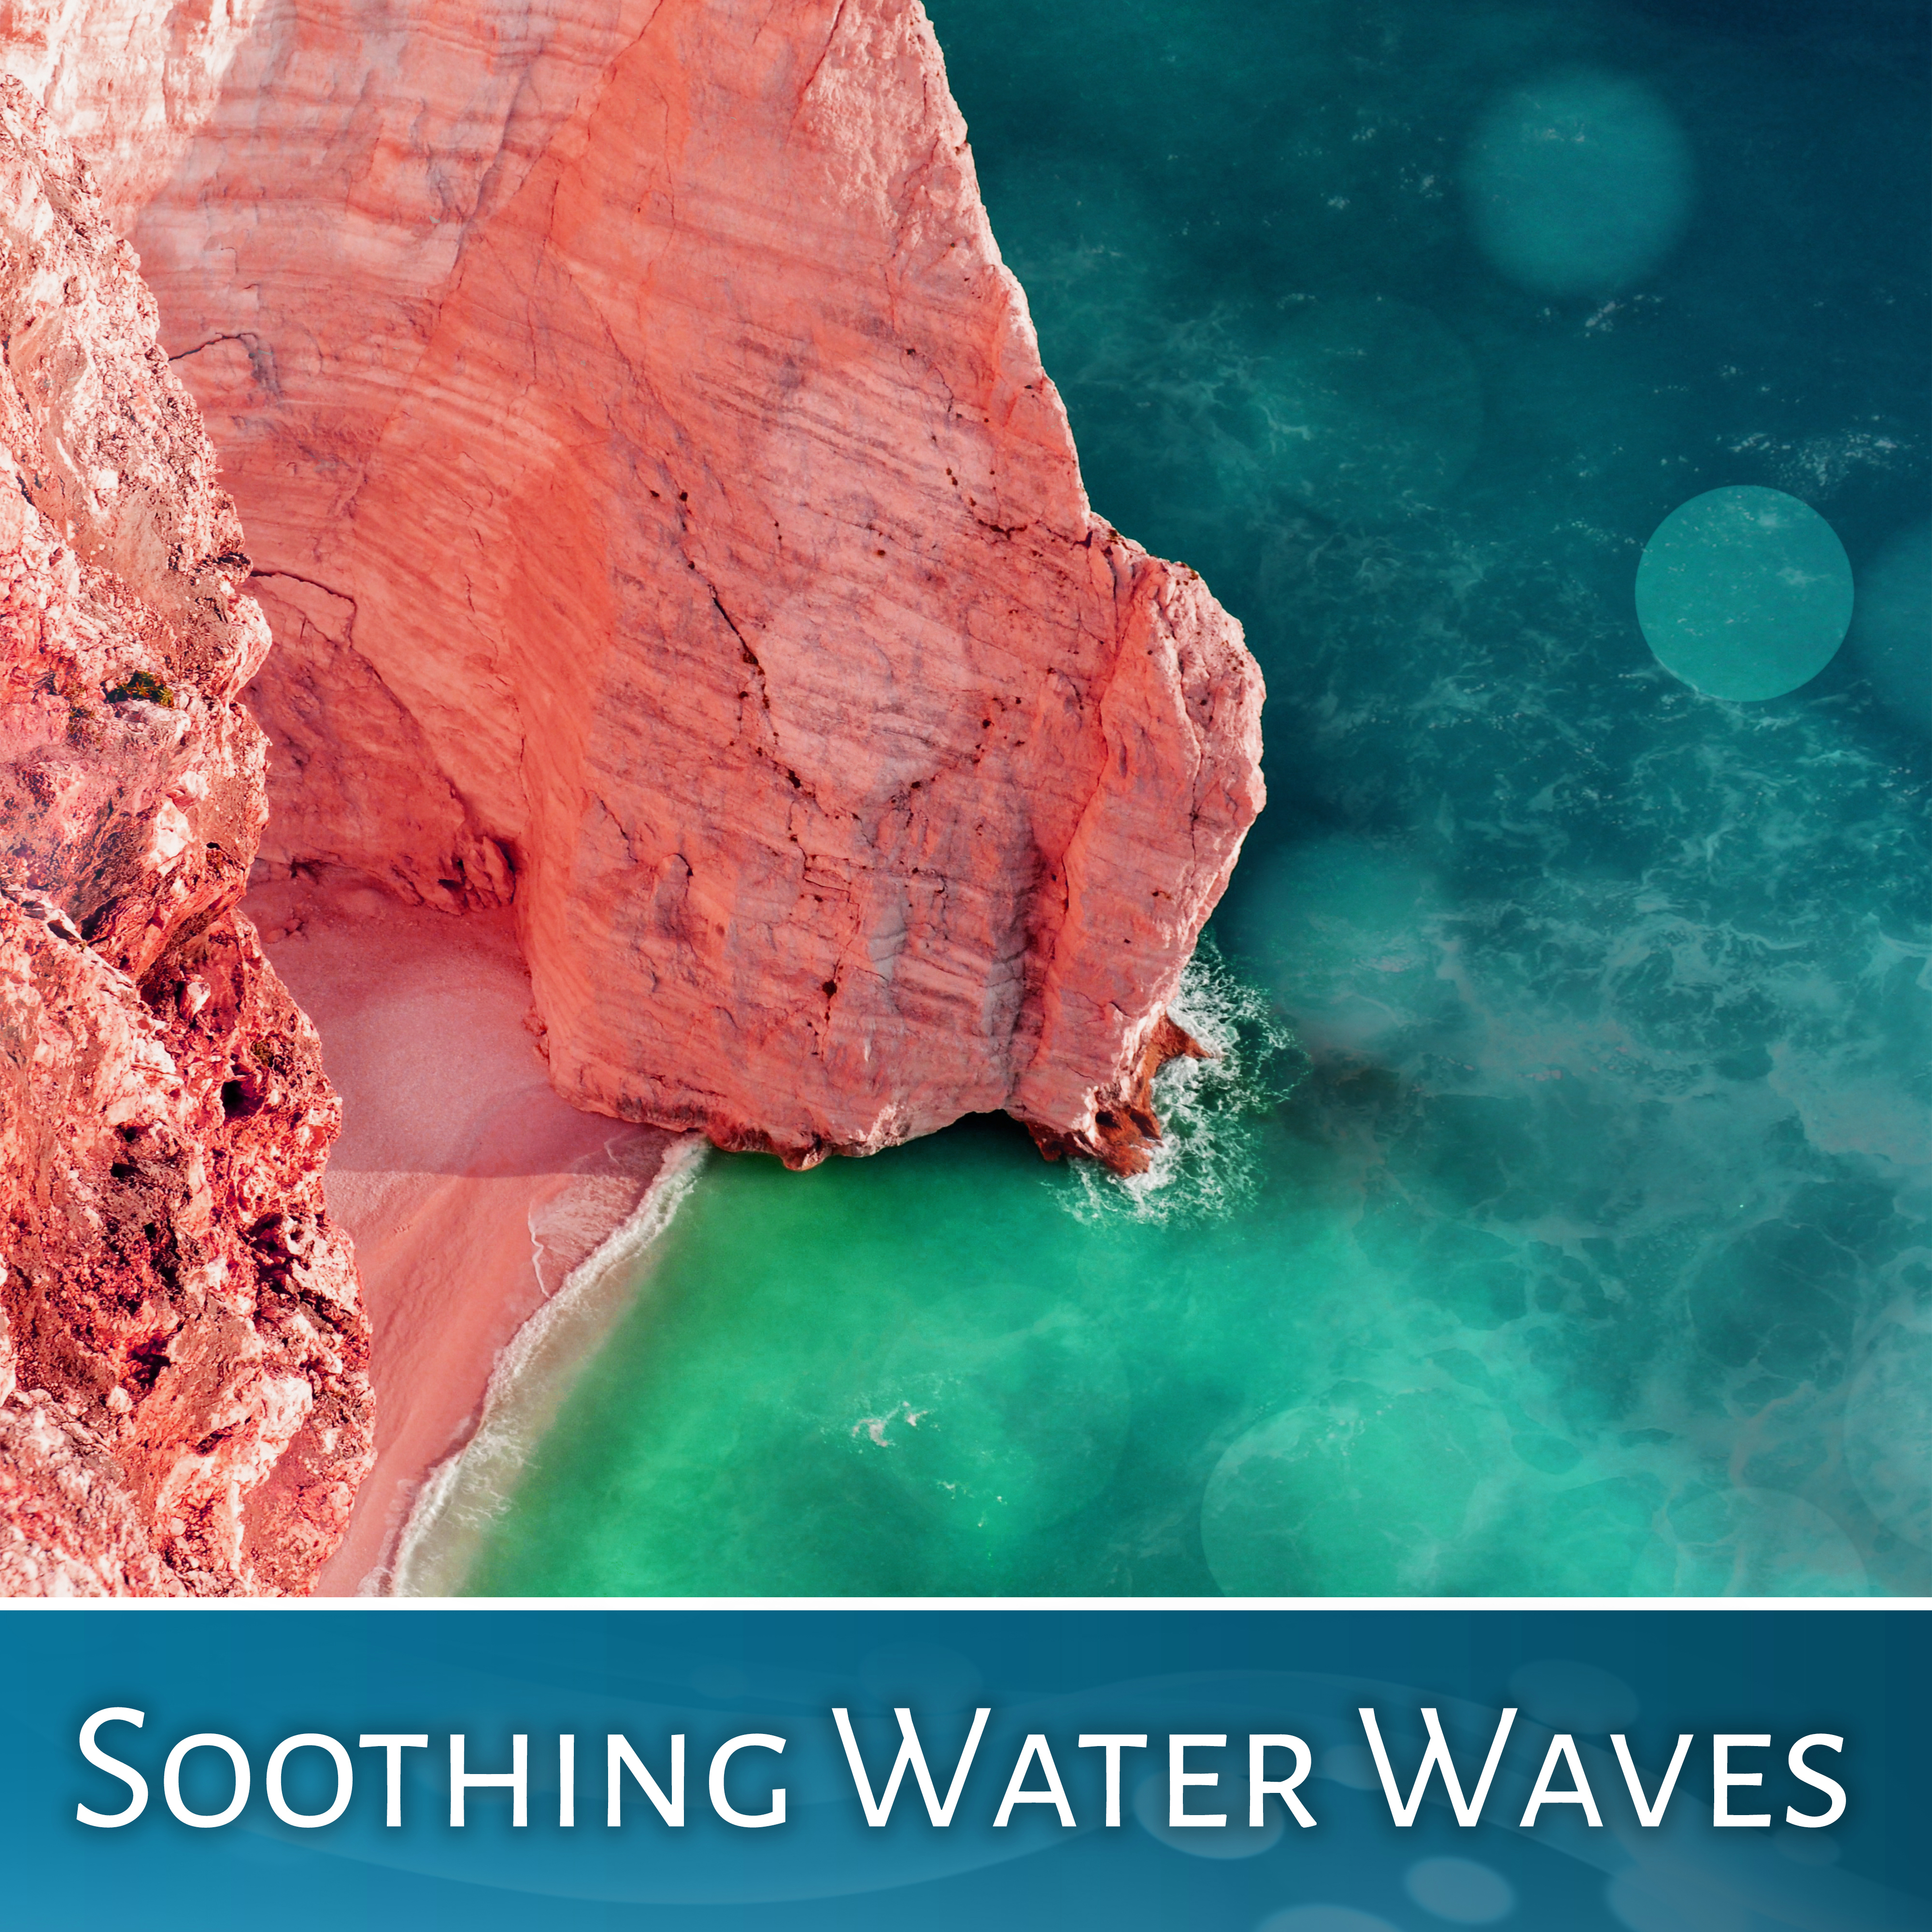 Soothing Water Waves – Nature Sounds to Relax, Easy Listening, Healing Therapy, New Age Sounds